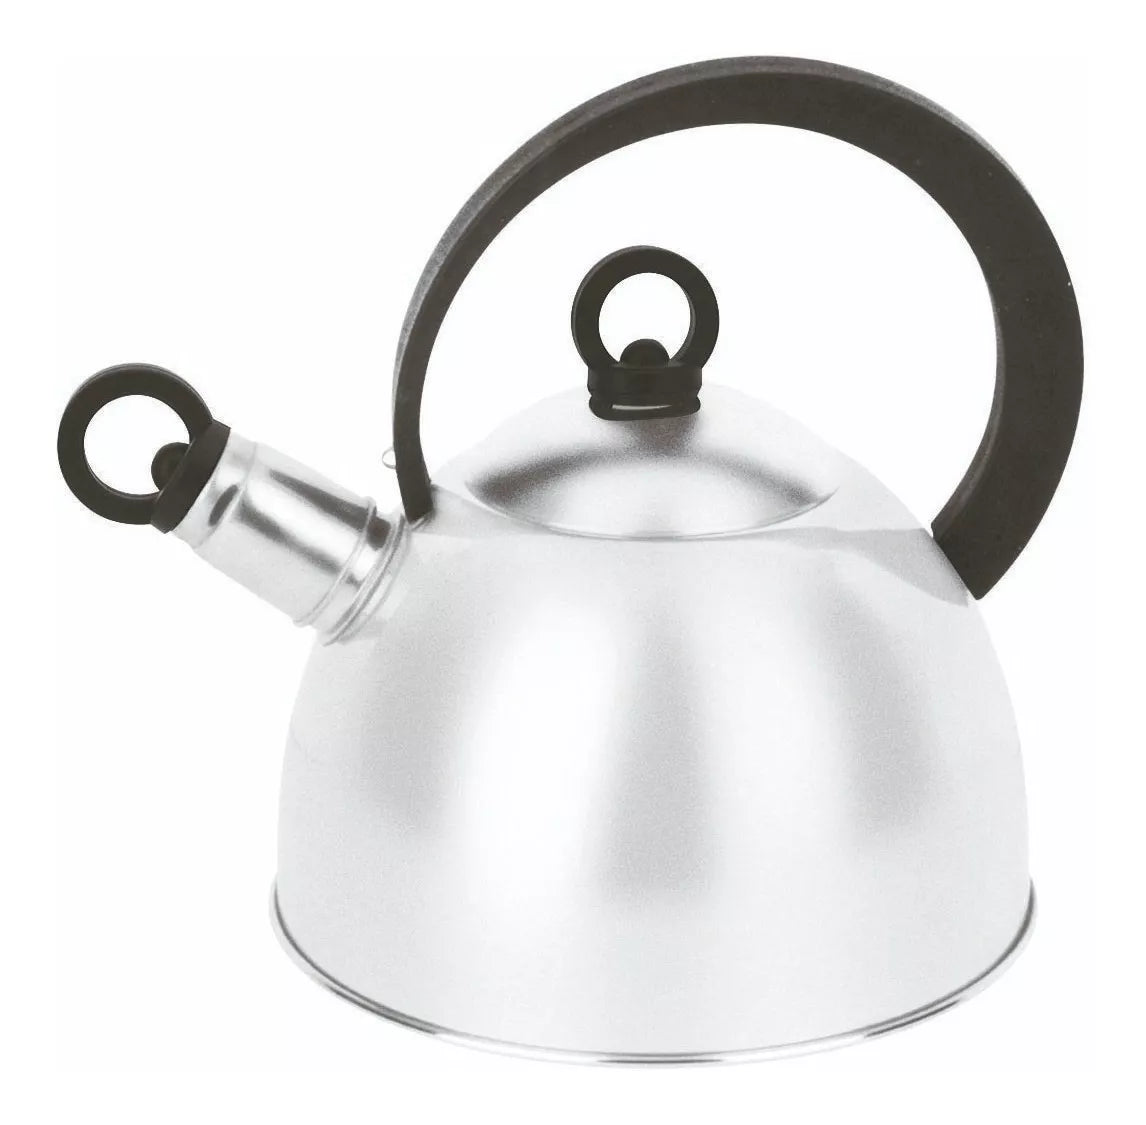 Vintage Copco Stainless Steel Whistling Tea Kettle Special -  Hong Kong